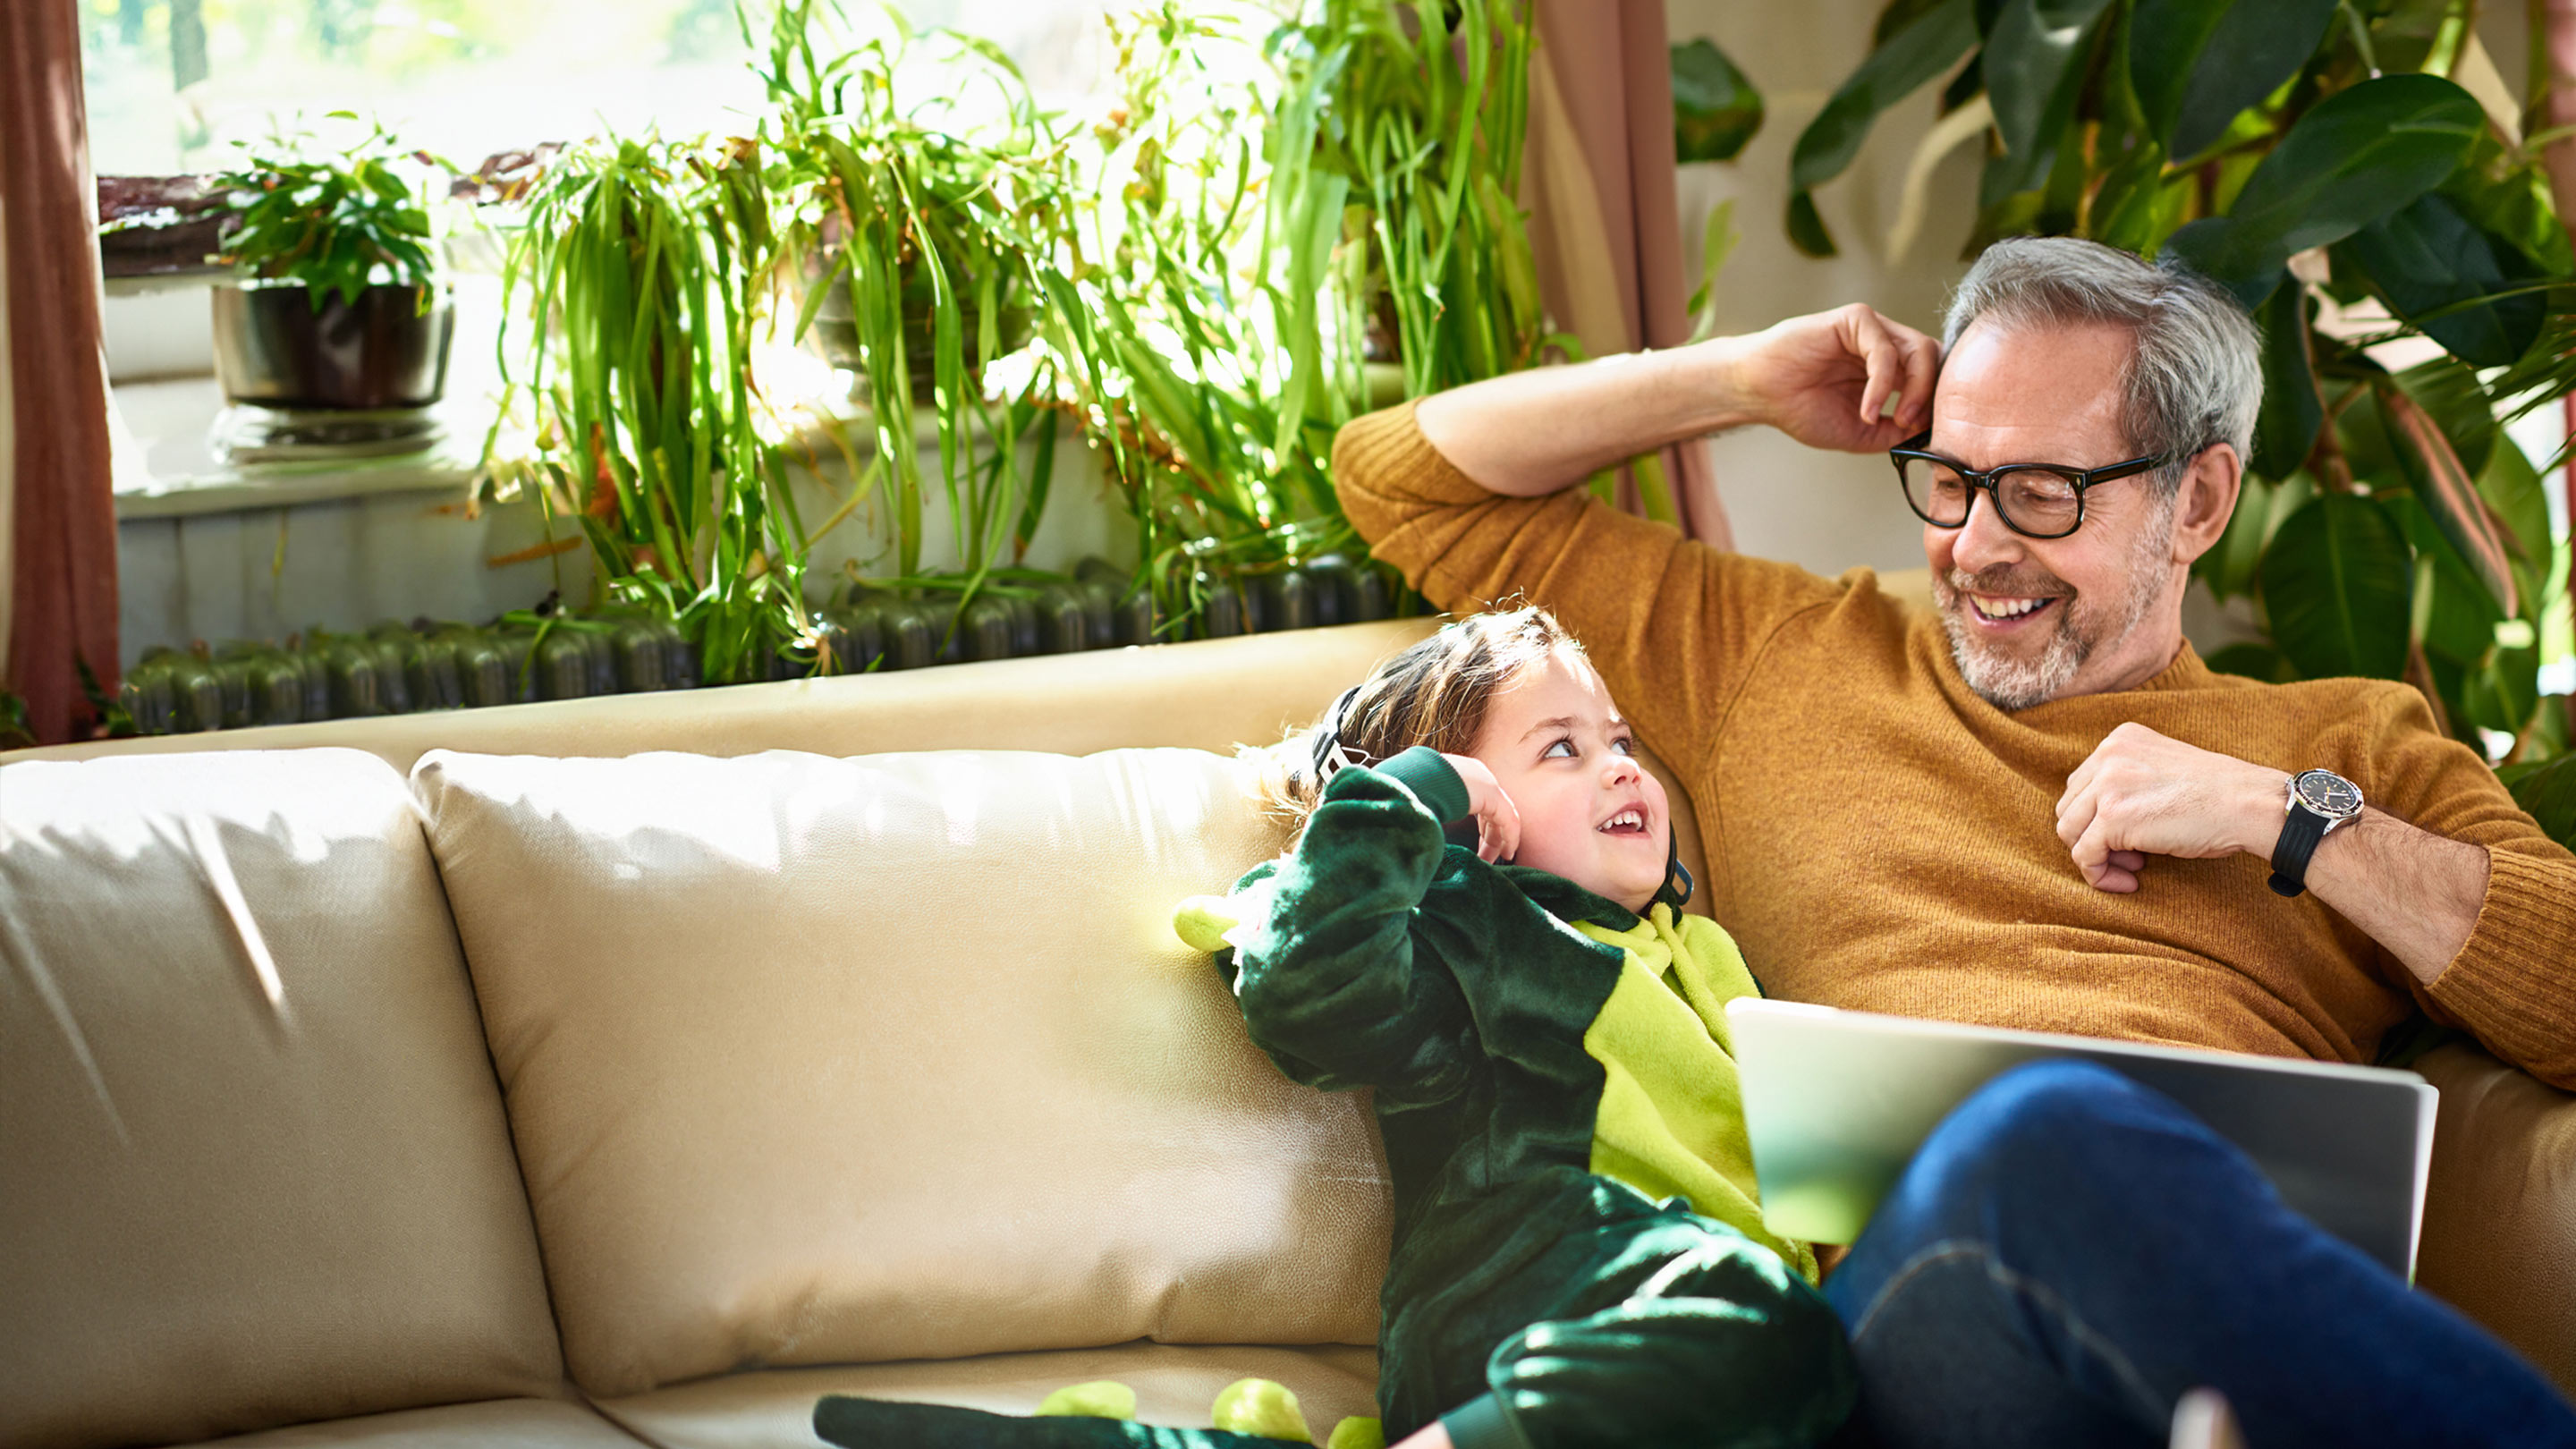 Adult with child dressed as a dinosaur sitting on a sofa together smiling